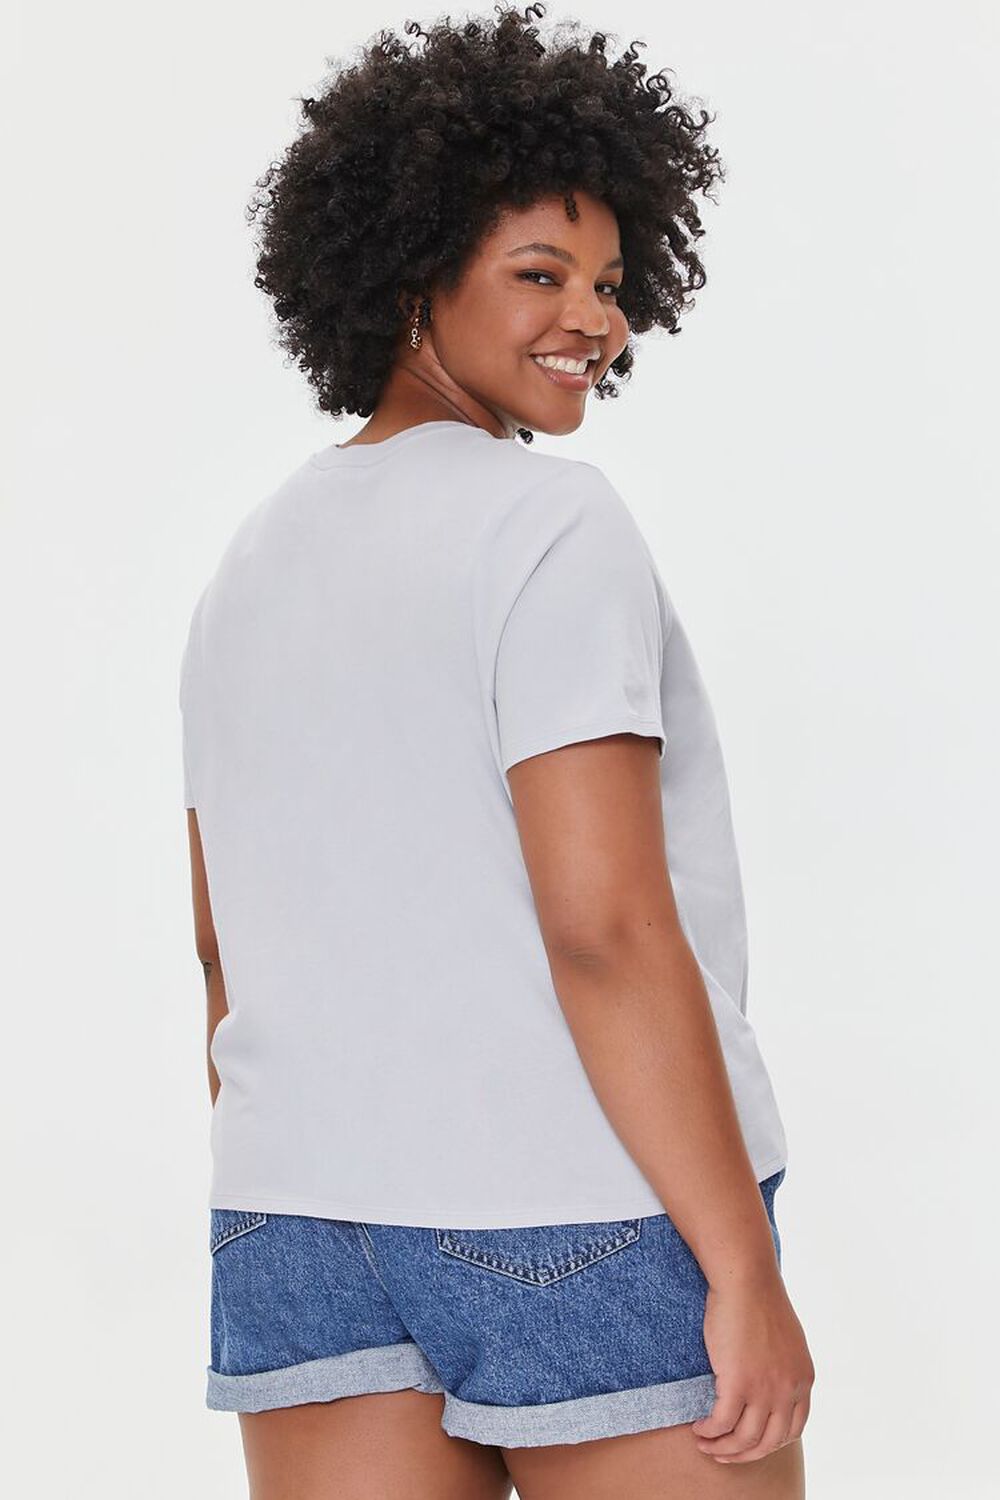 CHARCOAL/MULTI Plus Size Organically Grown Cotton Graphic Tee, image 3